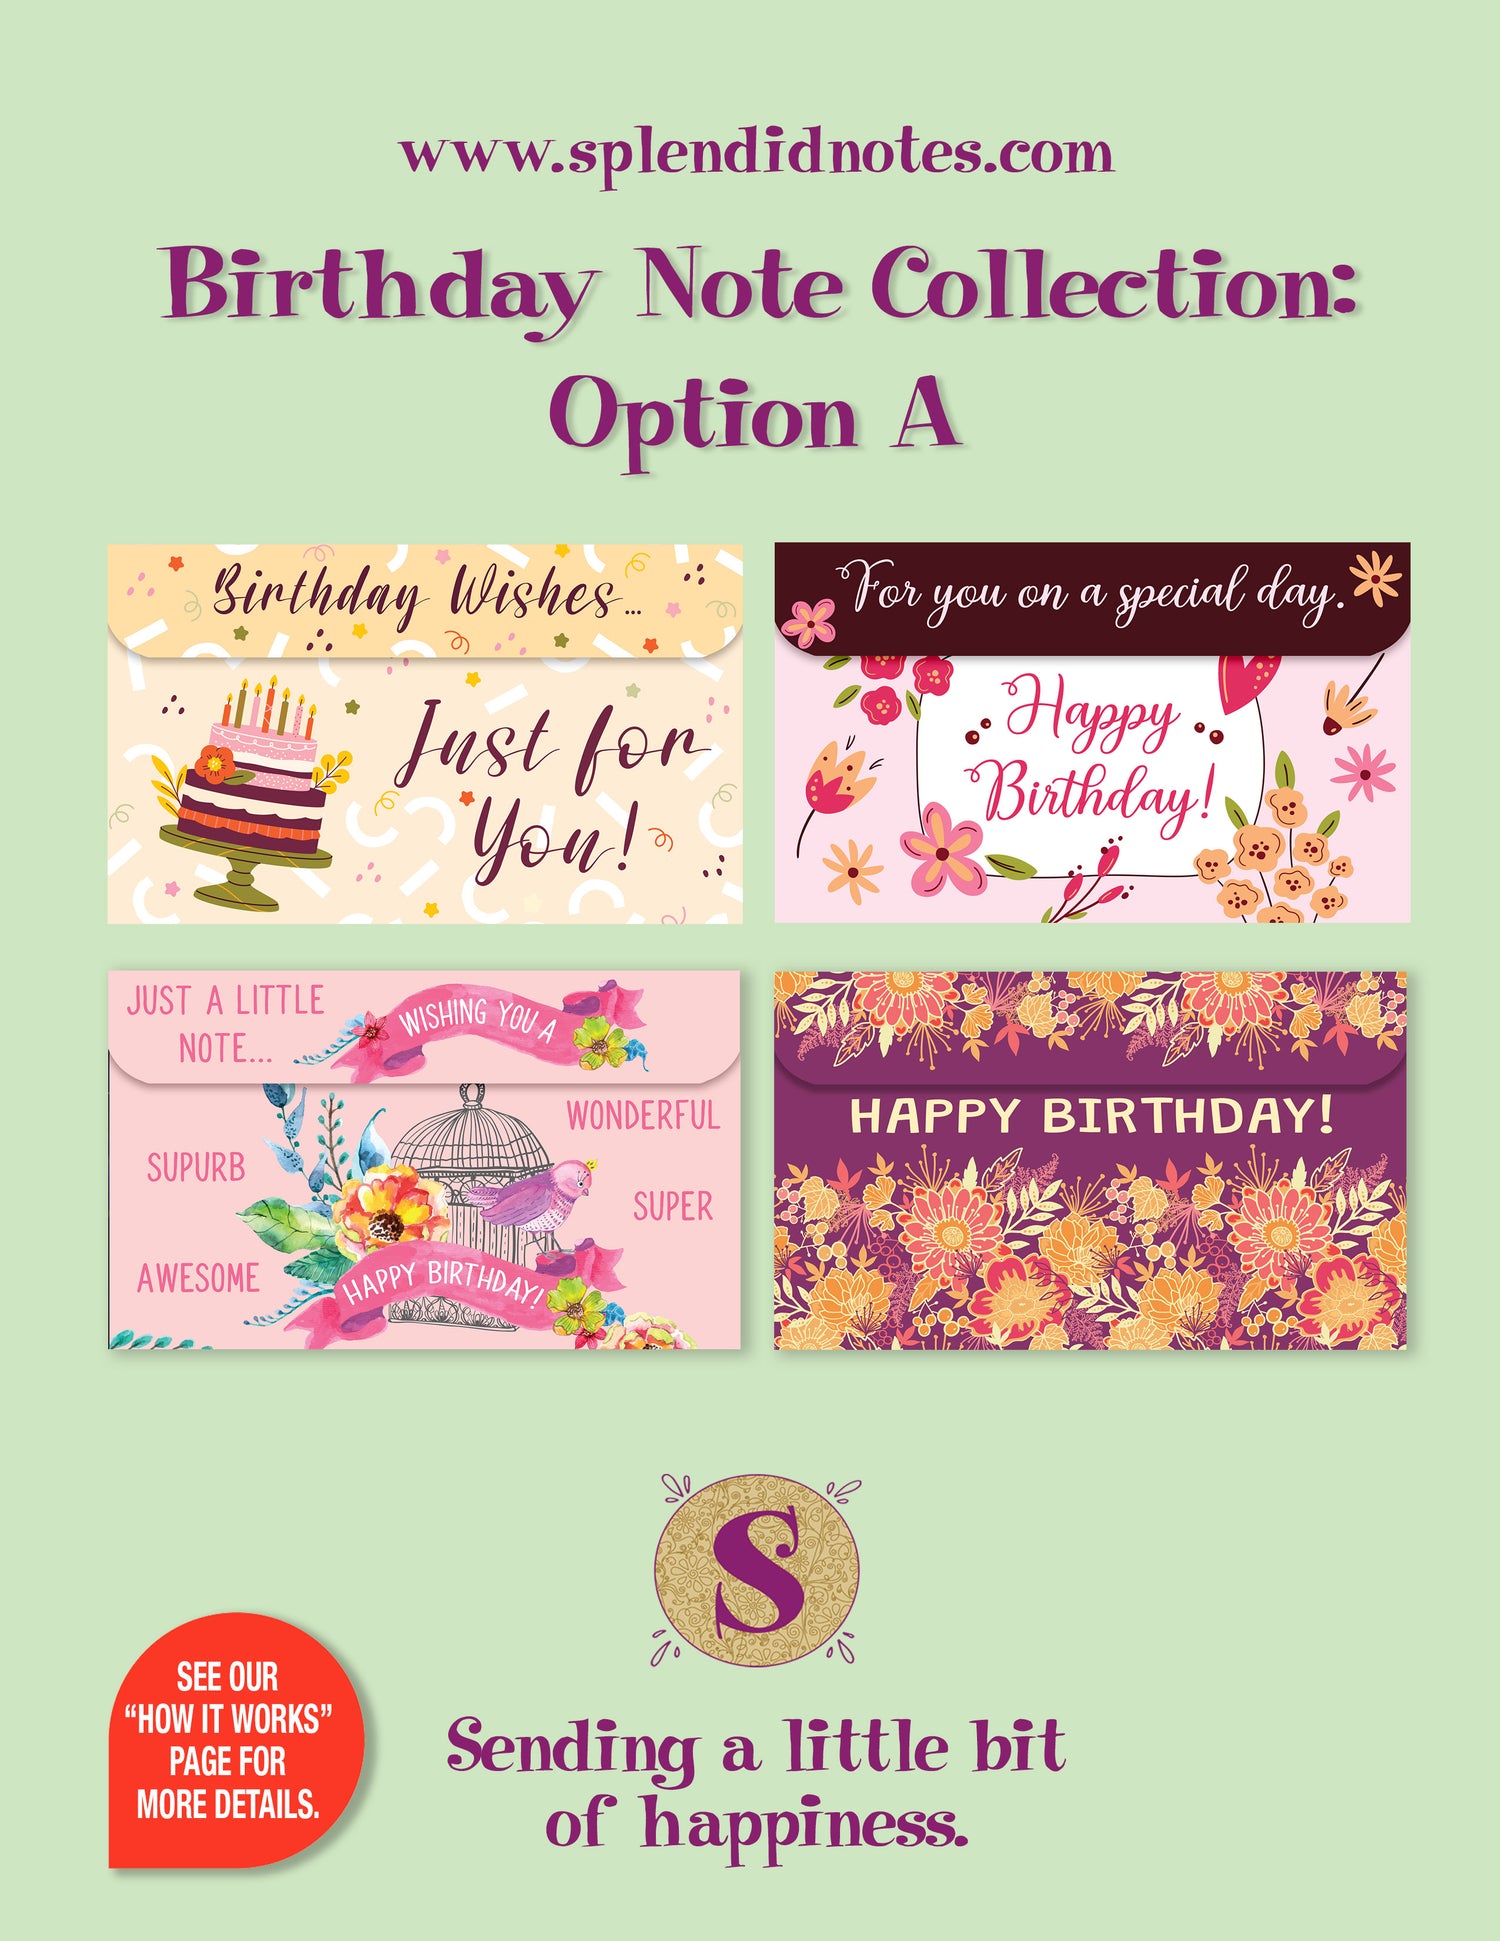 Birthday Note Collection: Option A